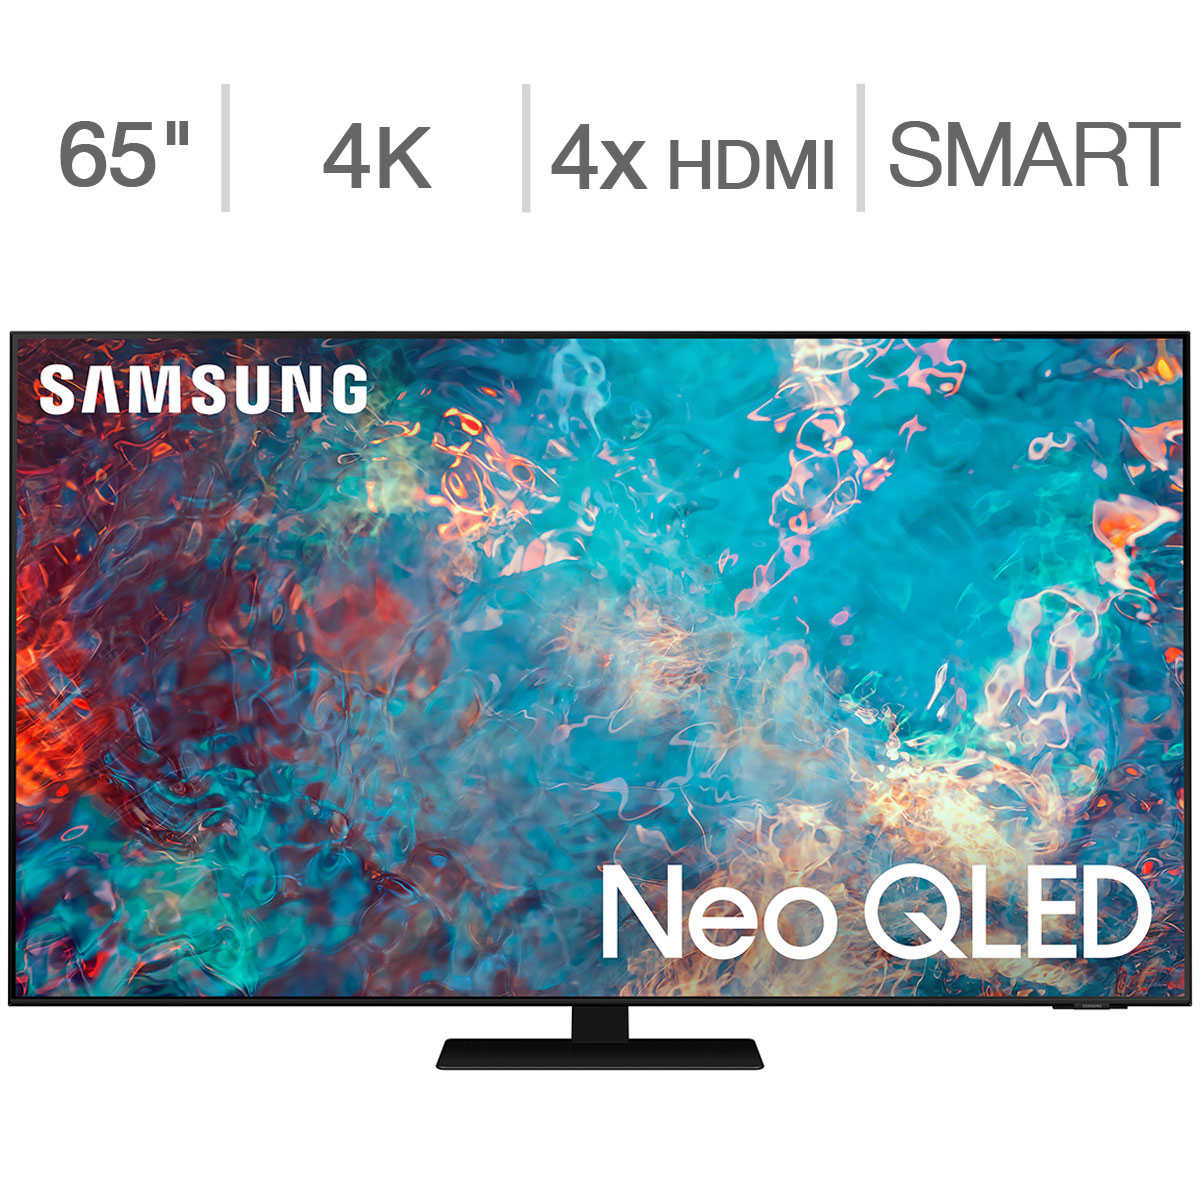 wees stil Bezem duisternis Samsung 65" Class - QN85 Series - 4K UHD Neo QLED LCD TV - Allstate 3-Year  Protection Plan Bundle Included for 5 years of total coverage* | Costco